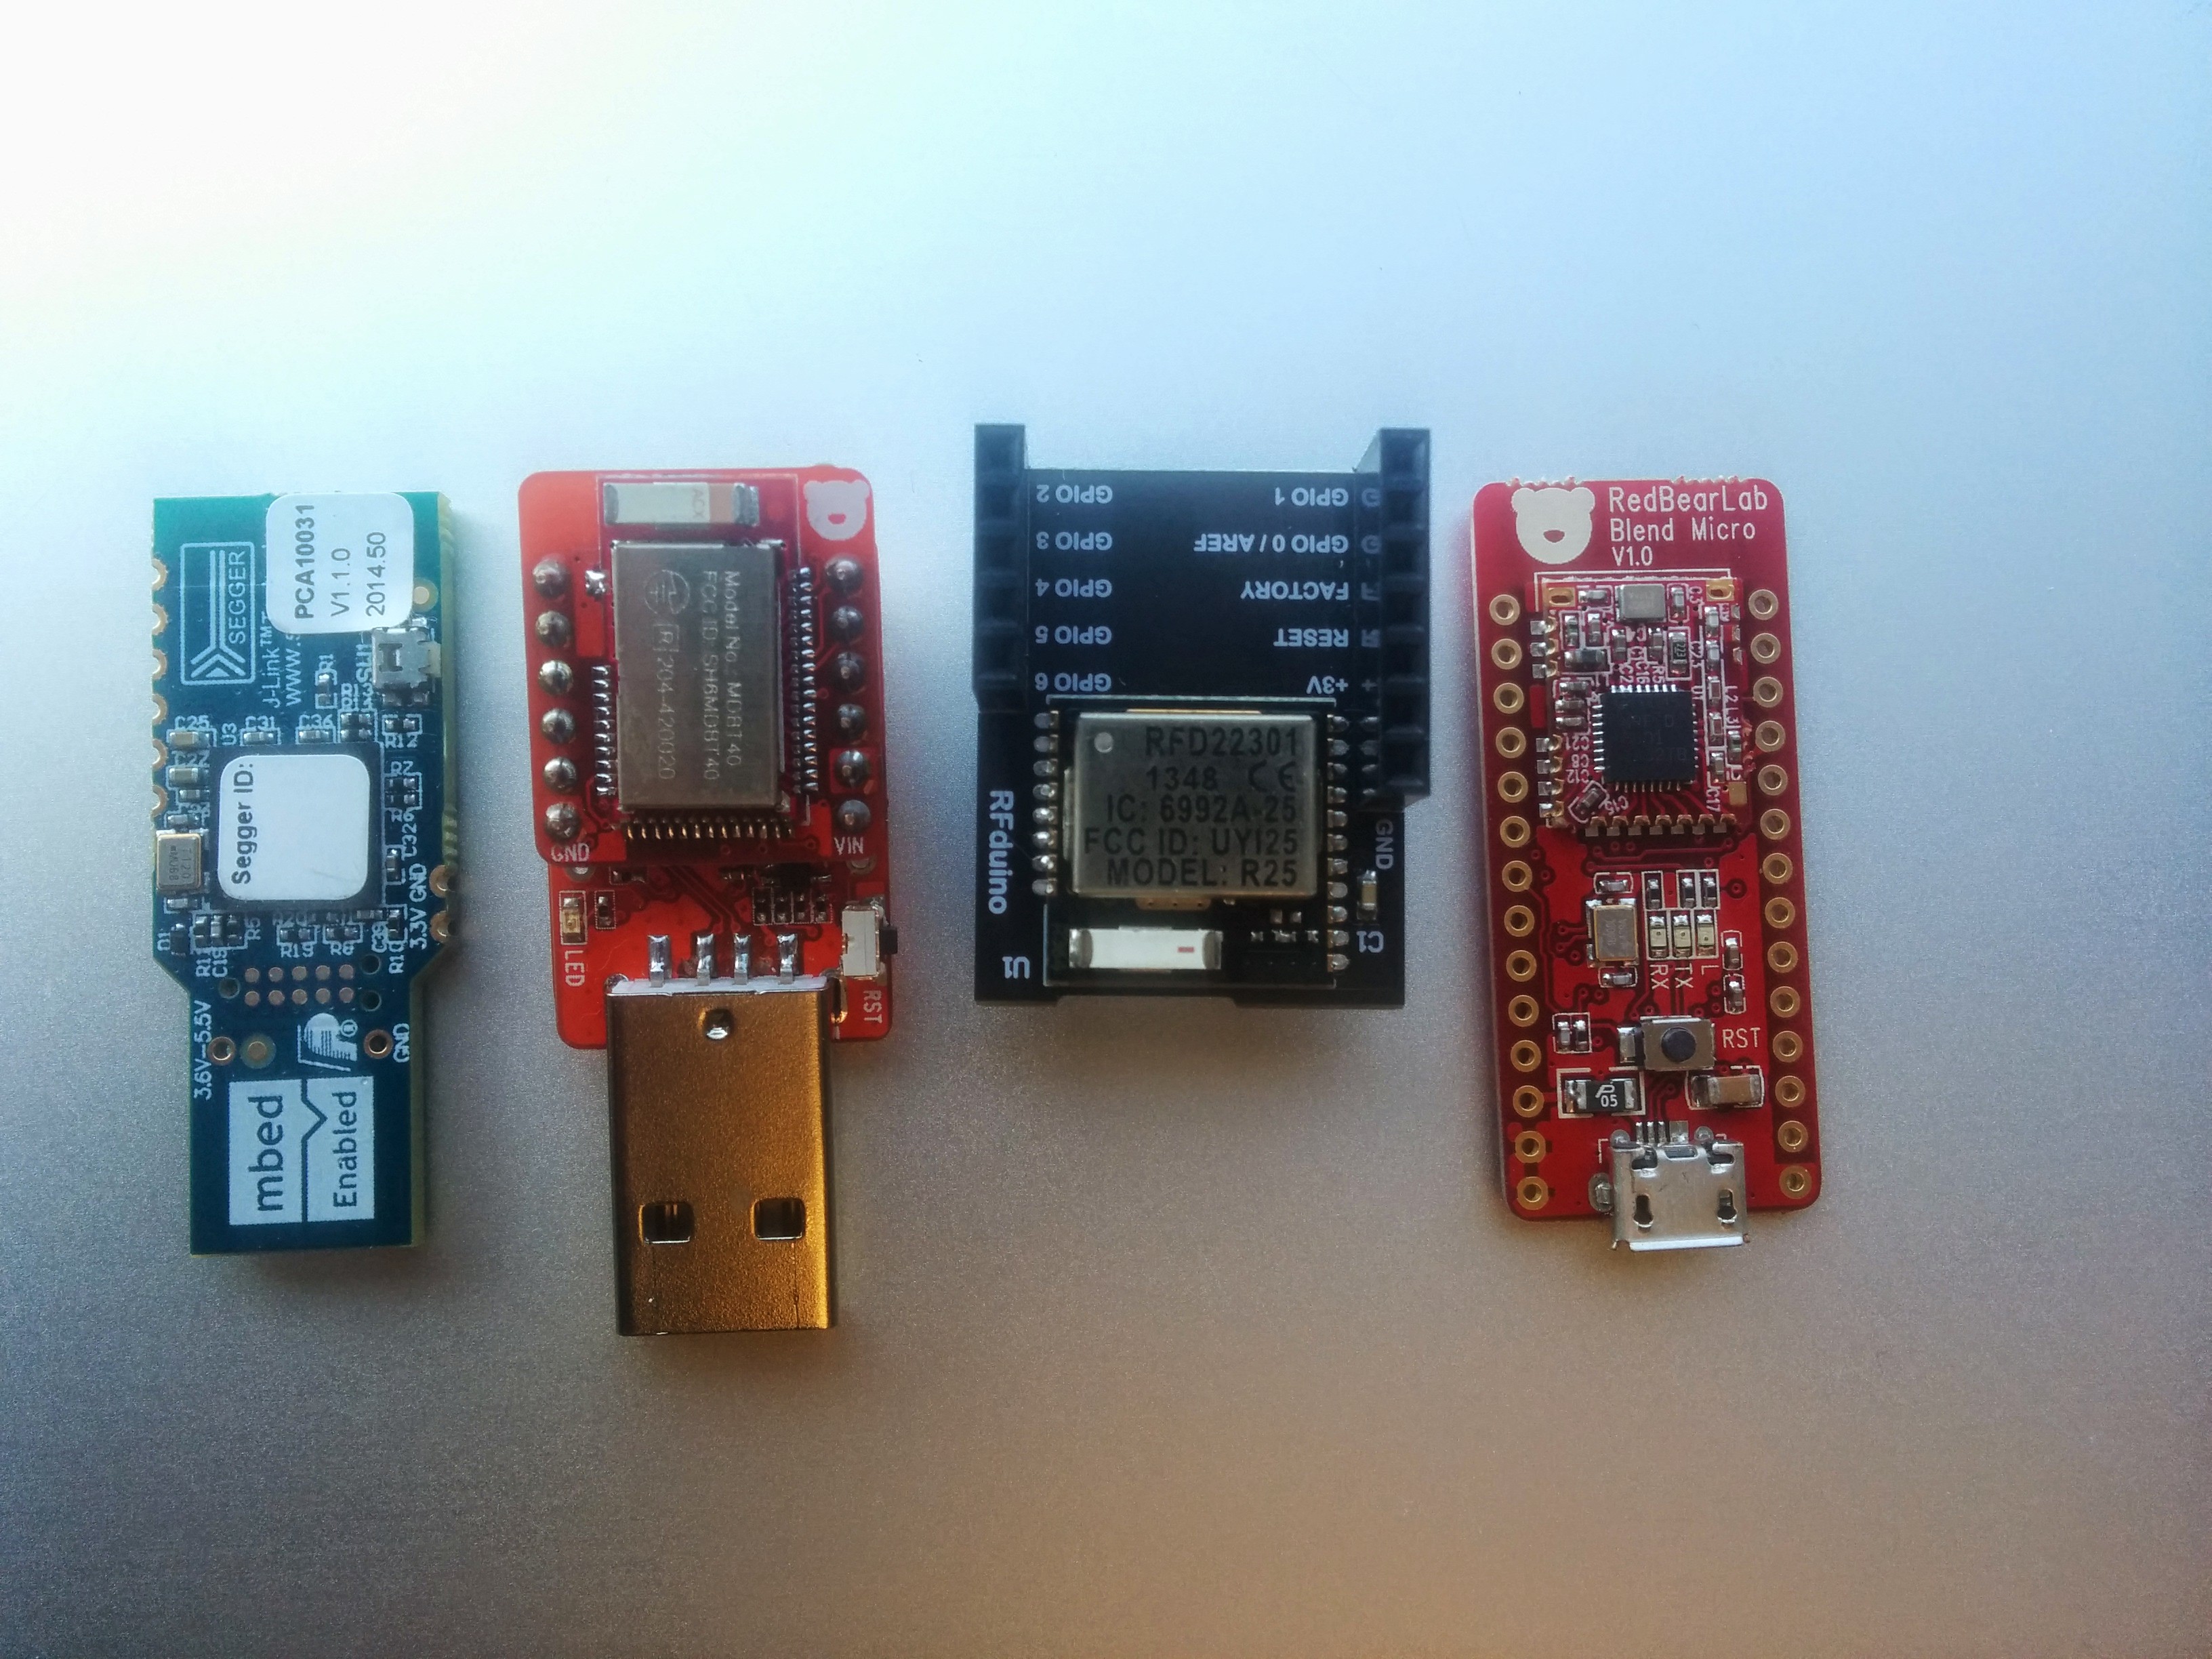 Creating Bluetooth Low Energy peripherals with Arduino